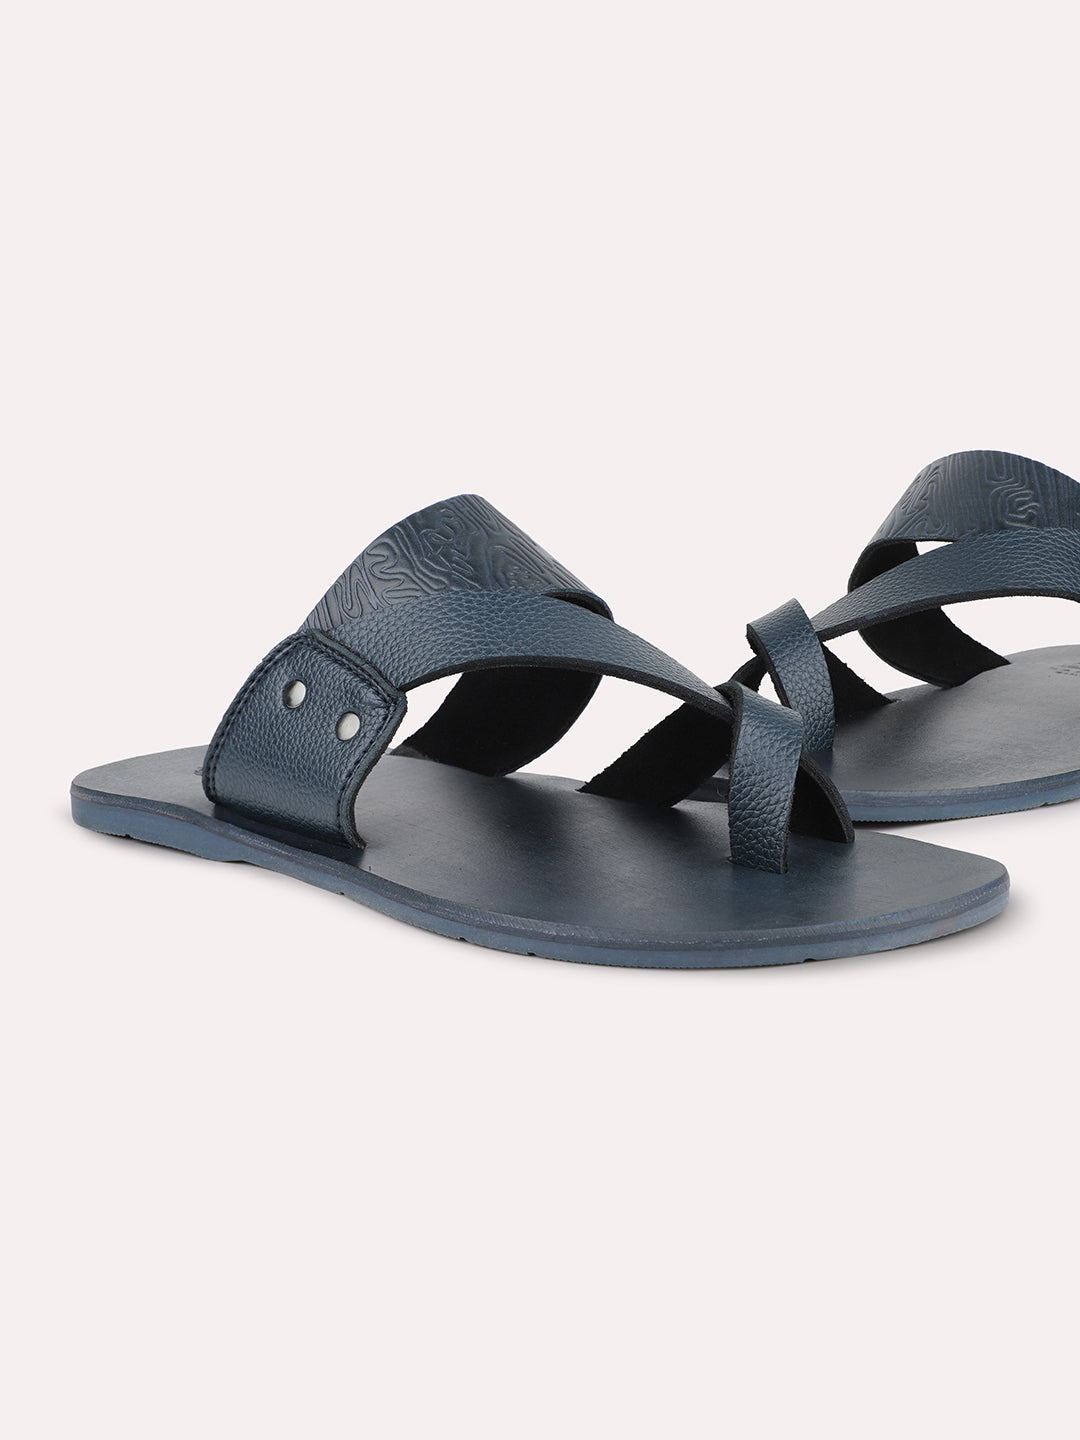 Privo Blue One Toe Casual Sandal For Mens